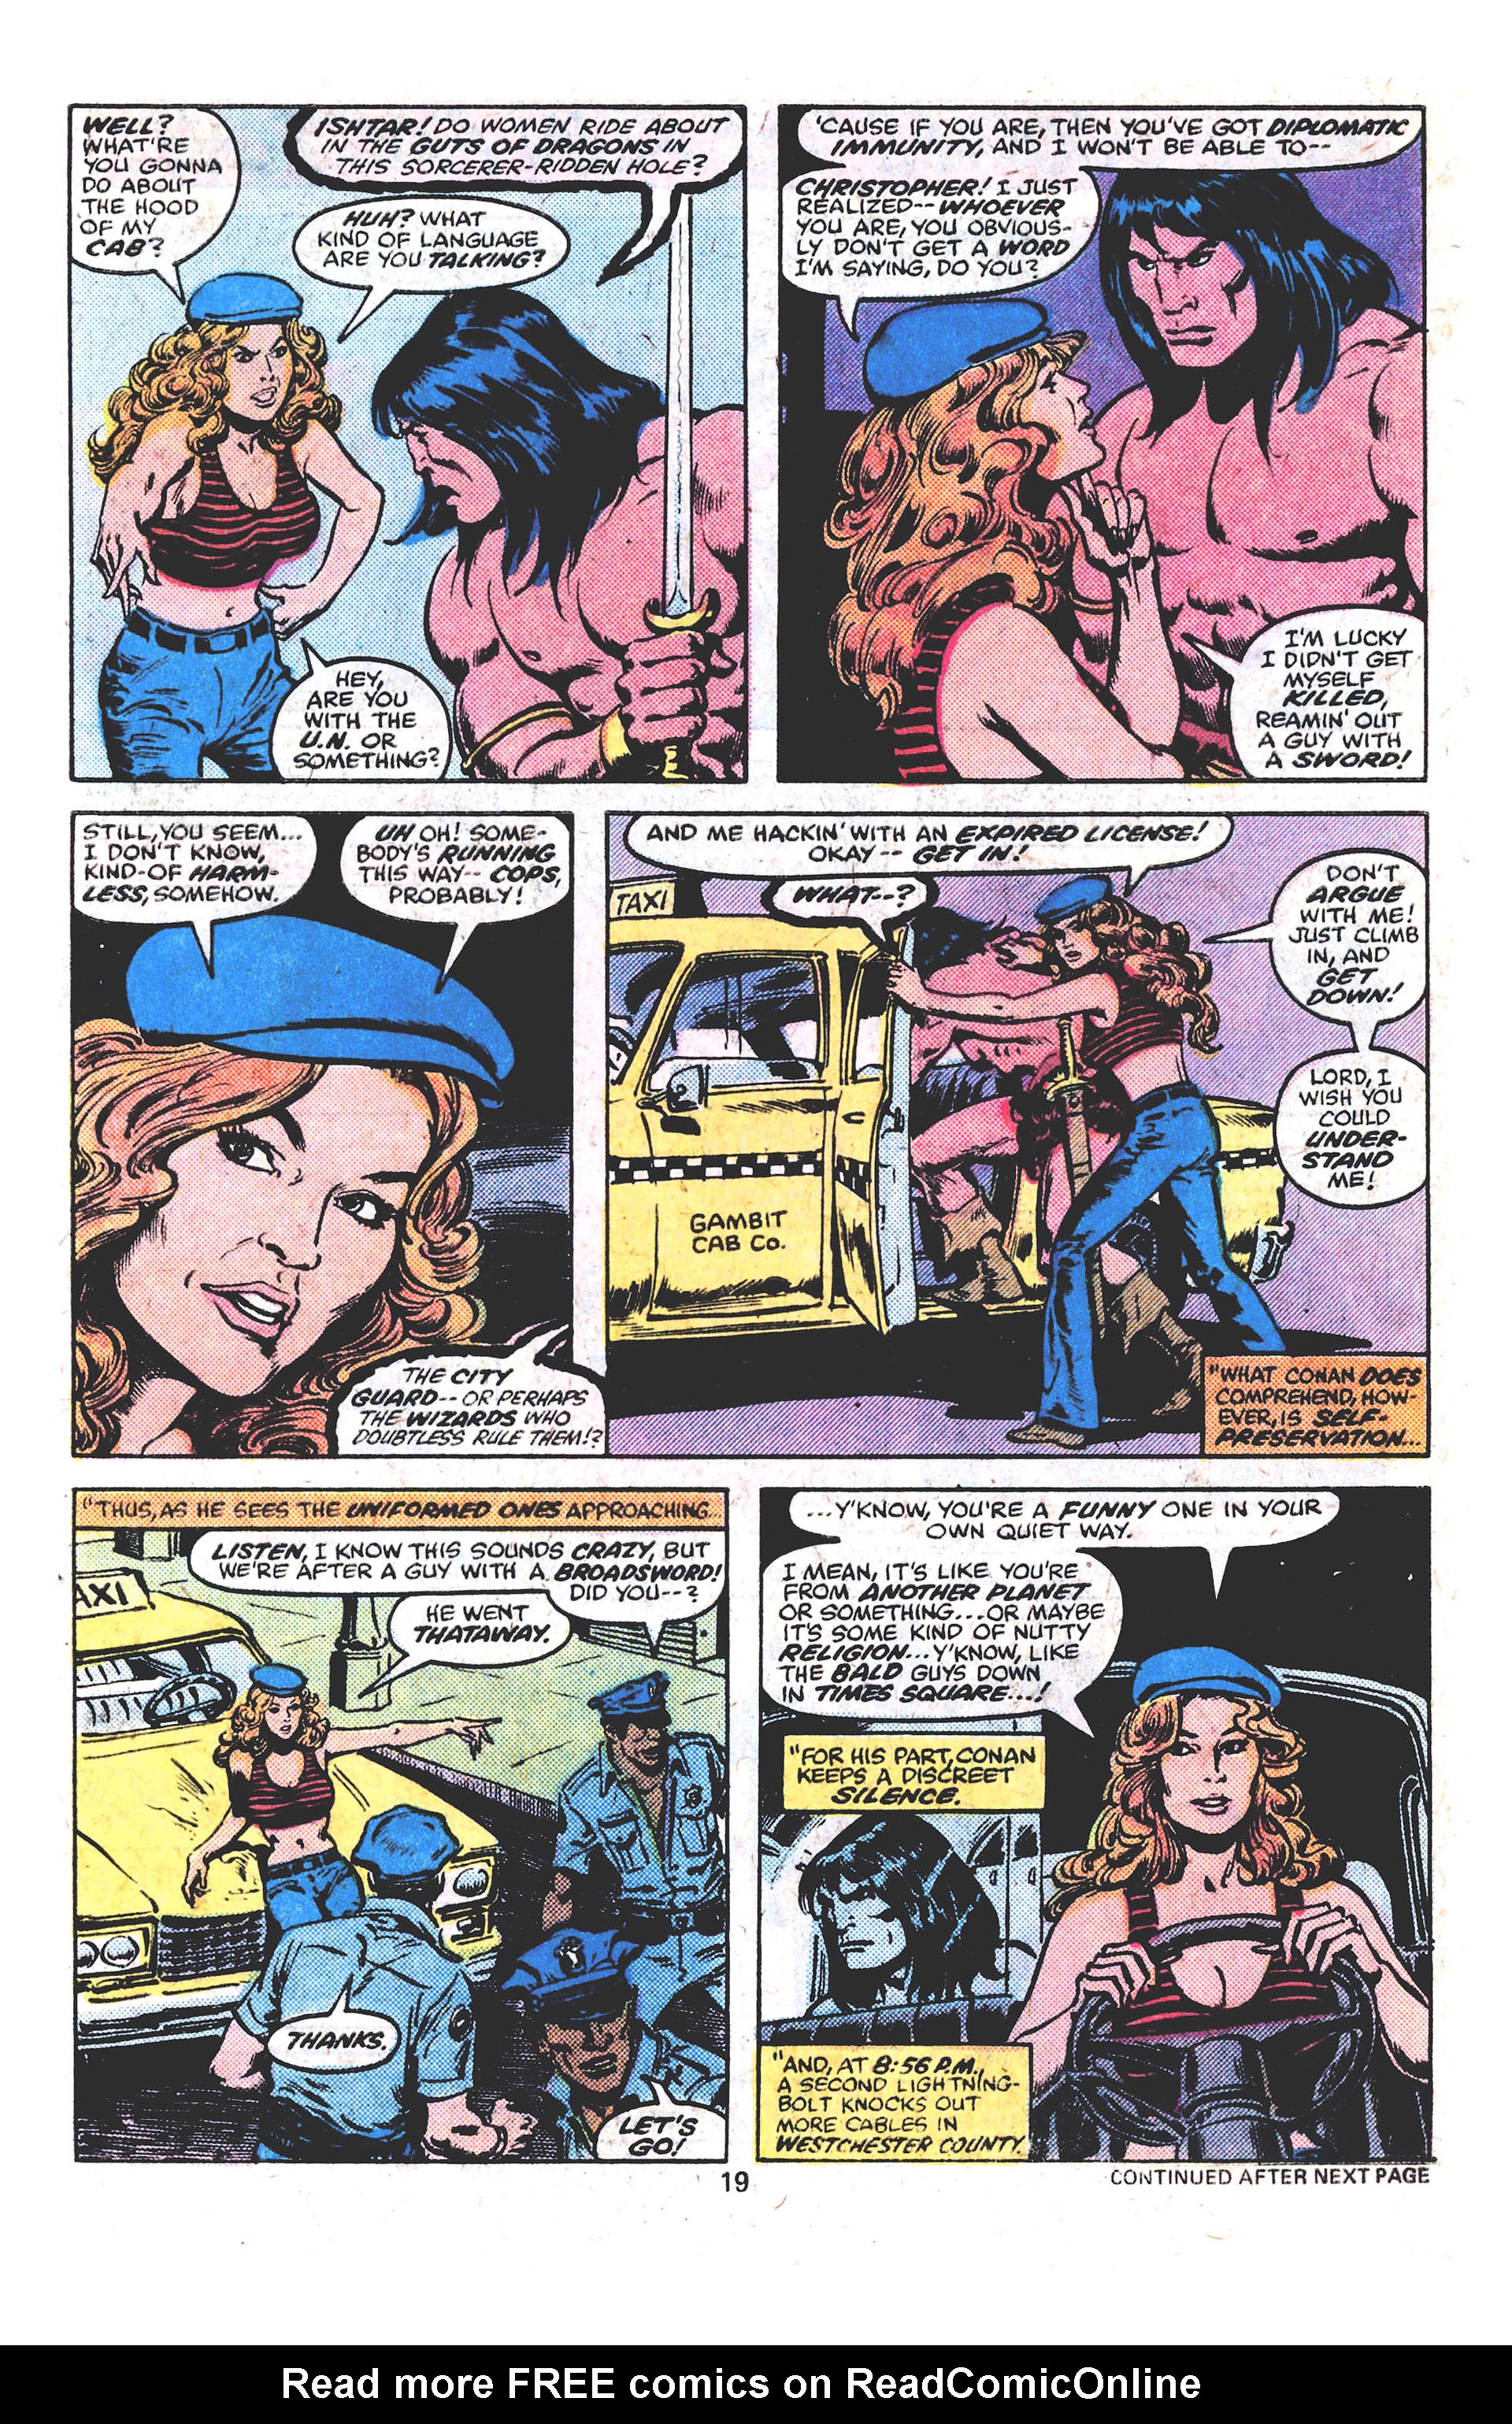 What If? (1977) Issue #13 - Conan The Barbarian walked the Earth Today #13 - English 16